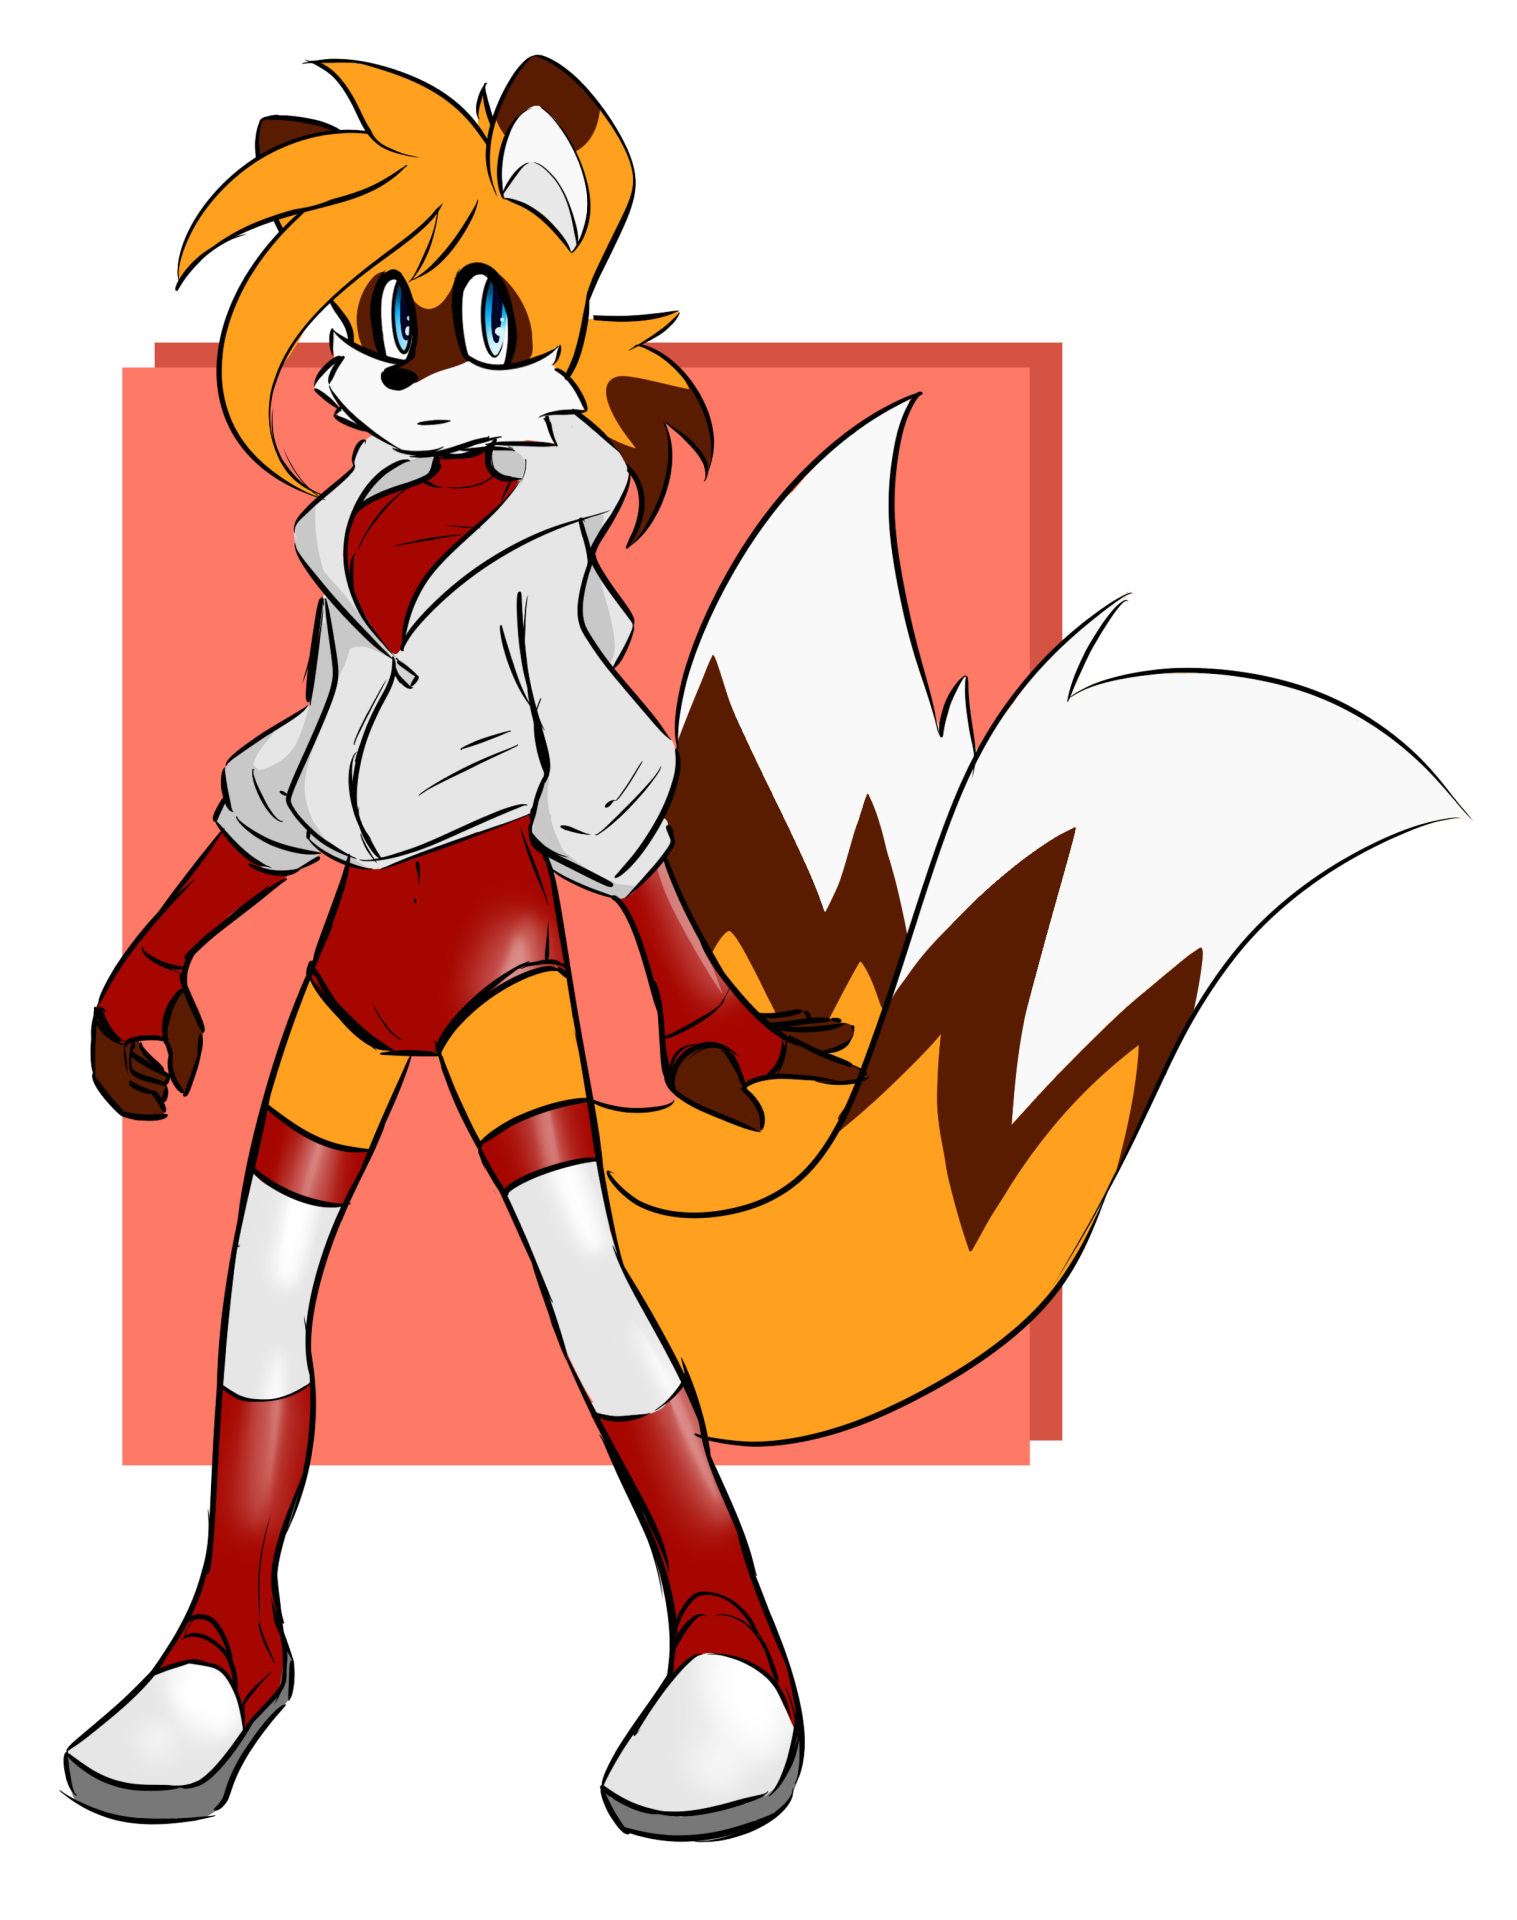 05-05 bored tails.png